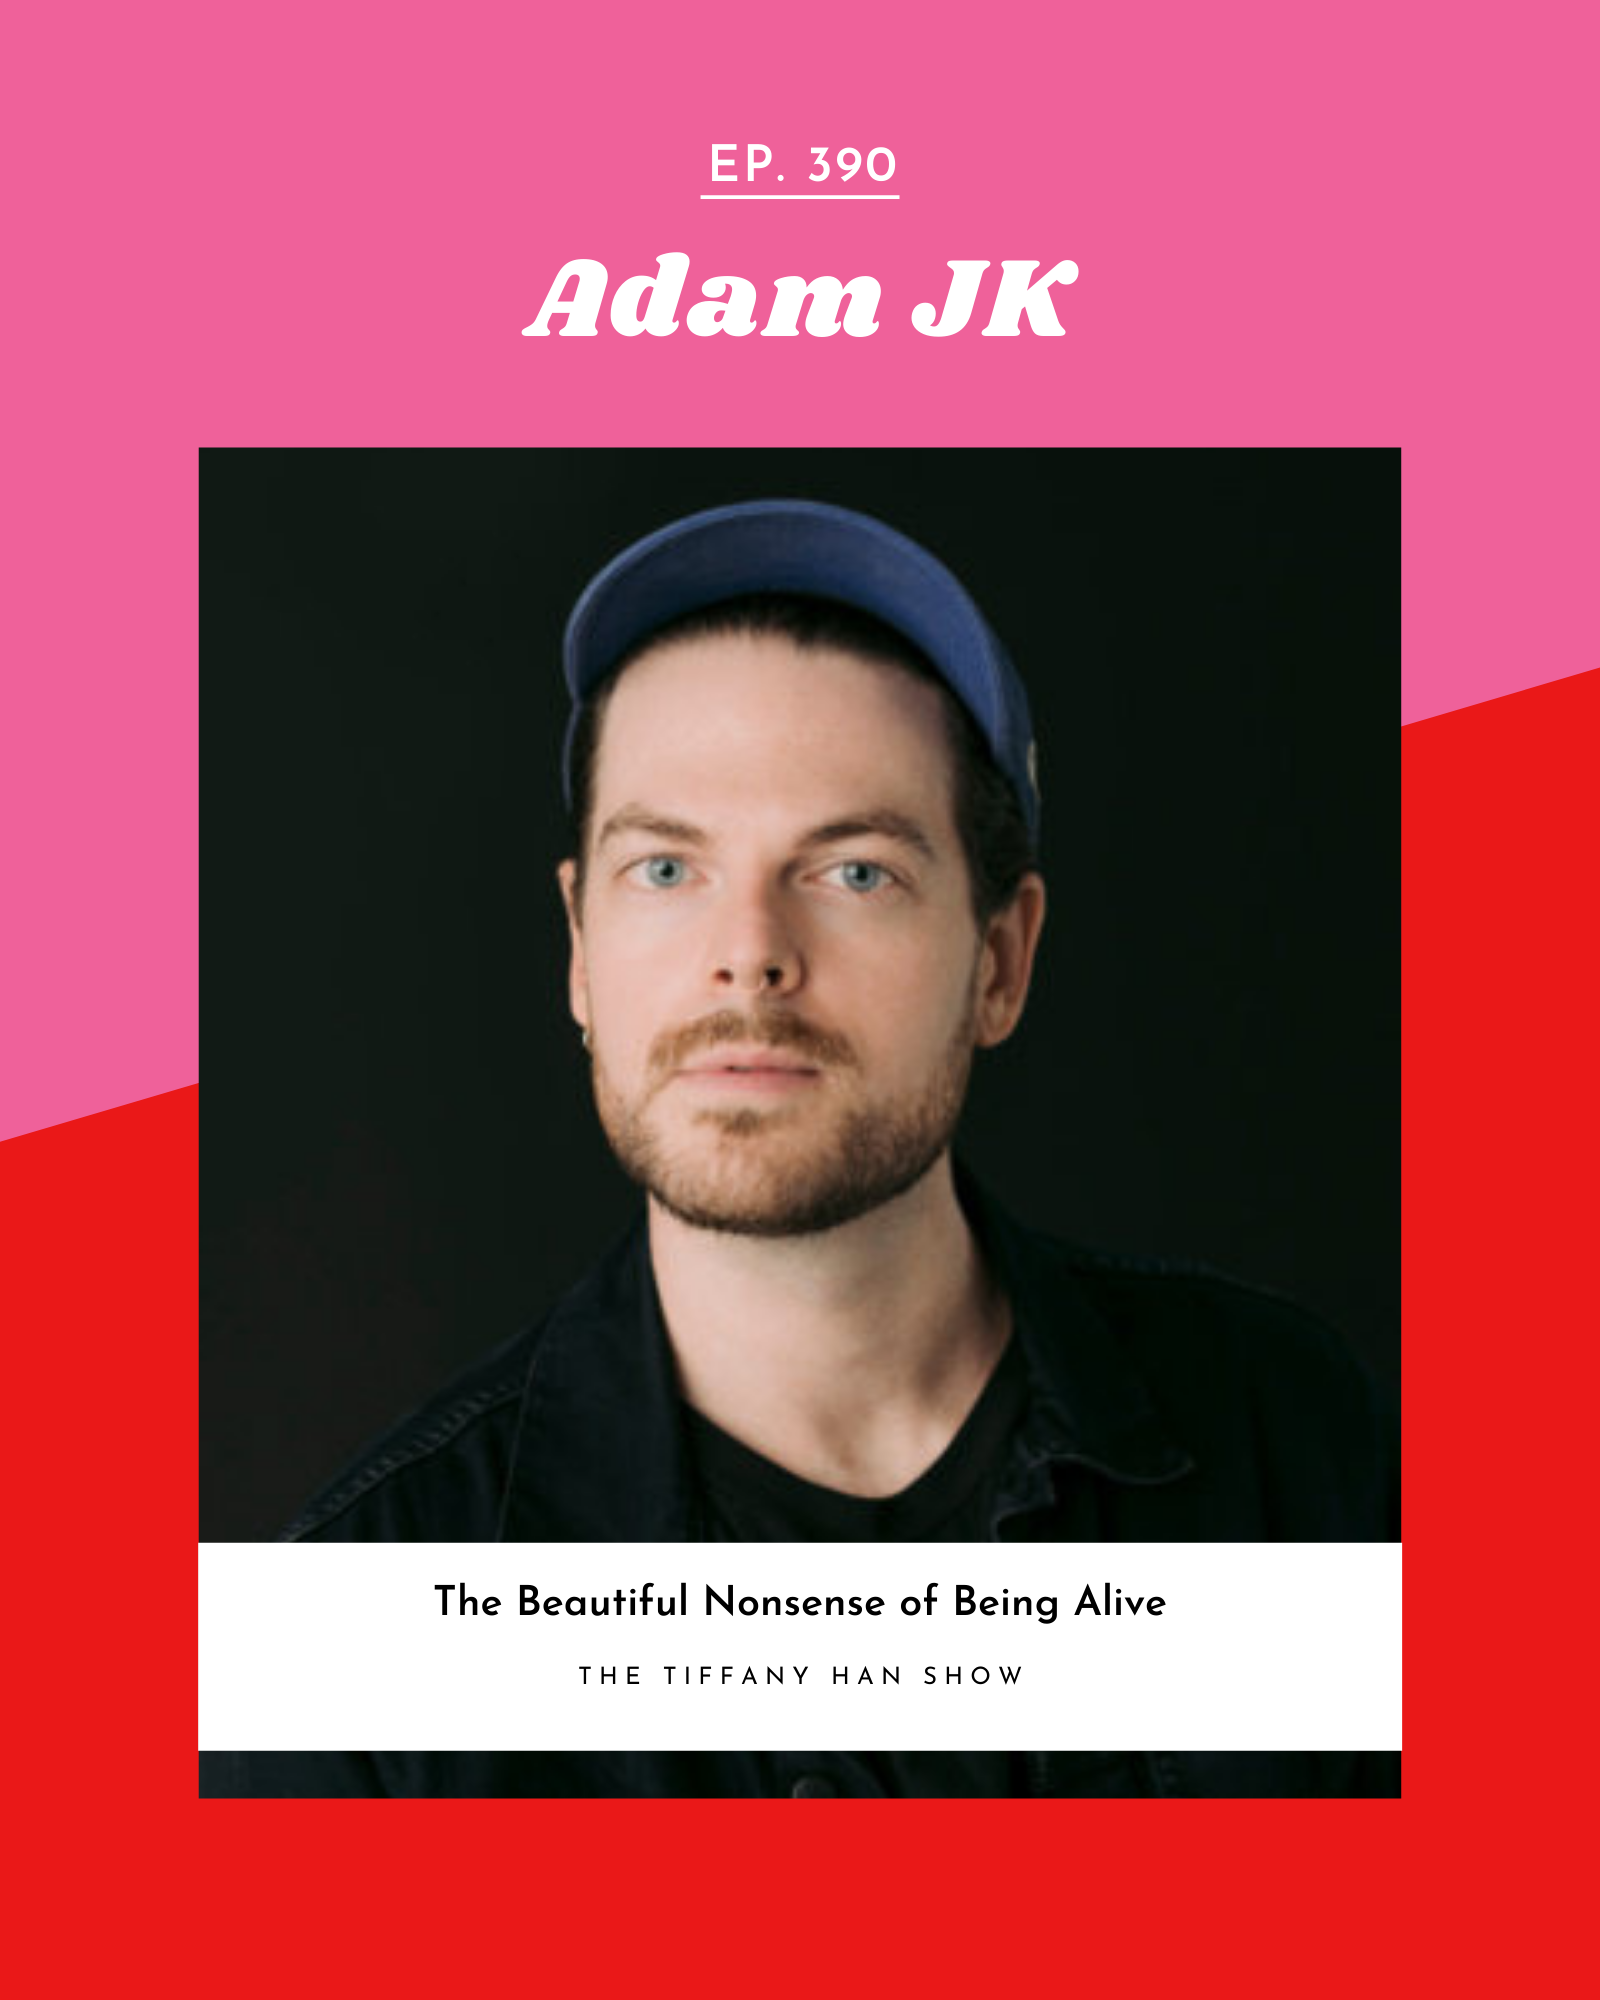 The Beautiful Nonsense of Being Alive with Adam JK